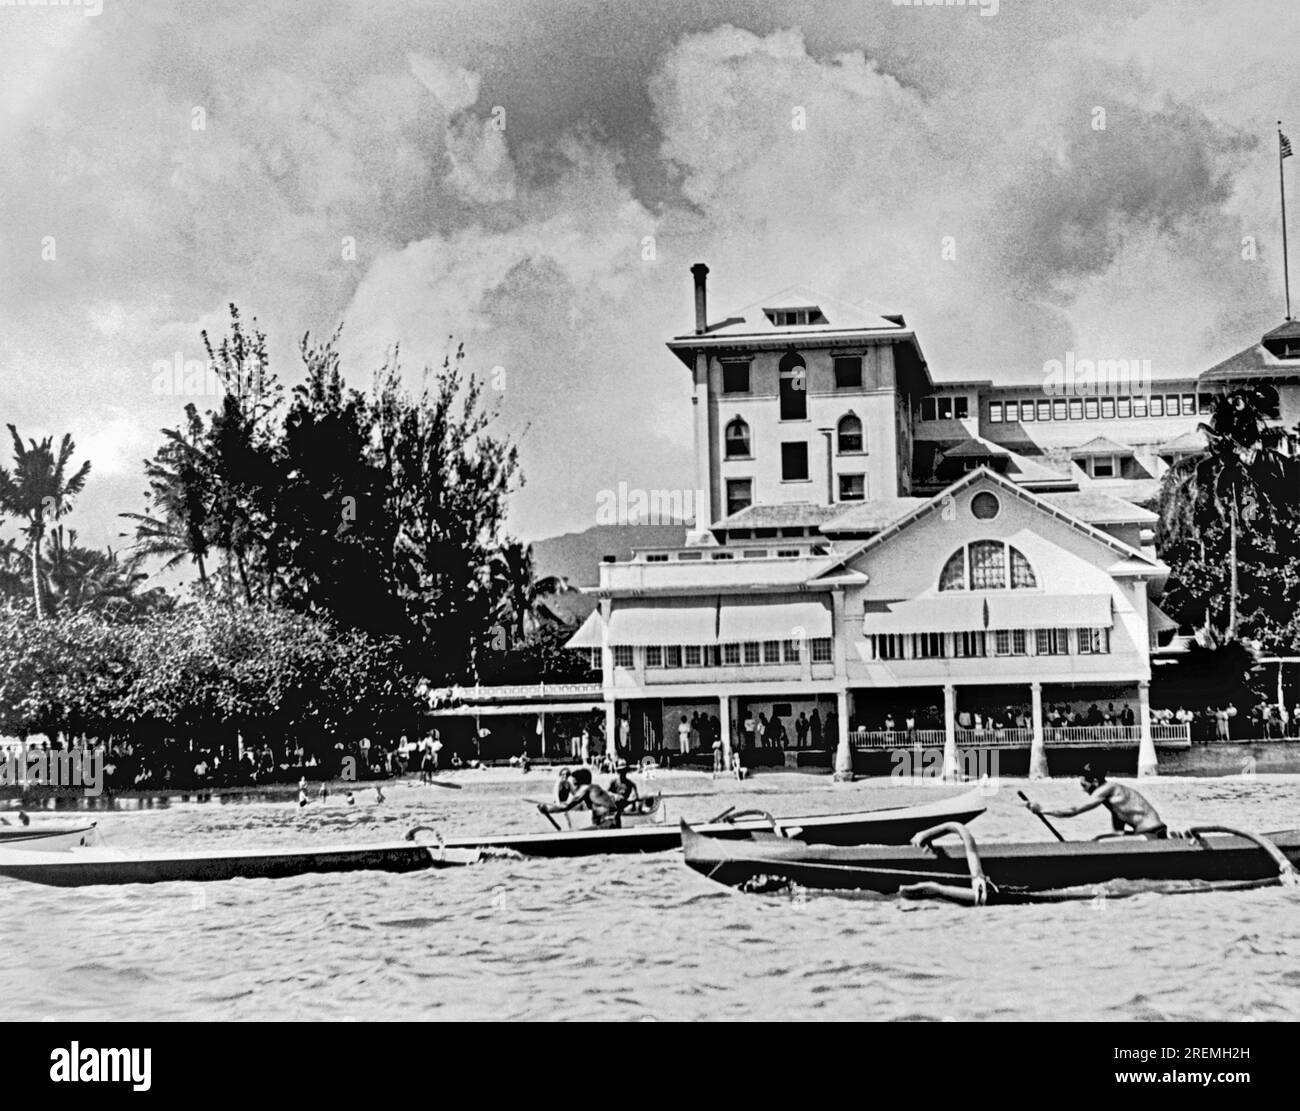 Honolulu, Hawaii    c 1928 Swimming star Duke Kahanamoku wins the one man canoe championship in his long black and white outrigger, crossing the finish line in front of the Moana Hotel on Waikiki beach. Stock Photo